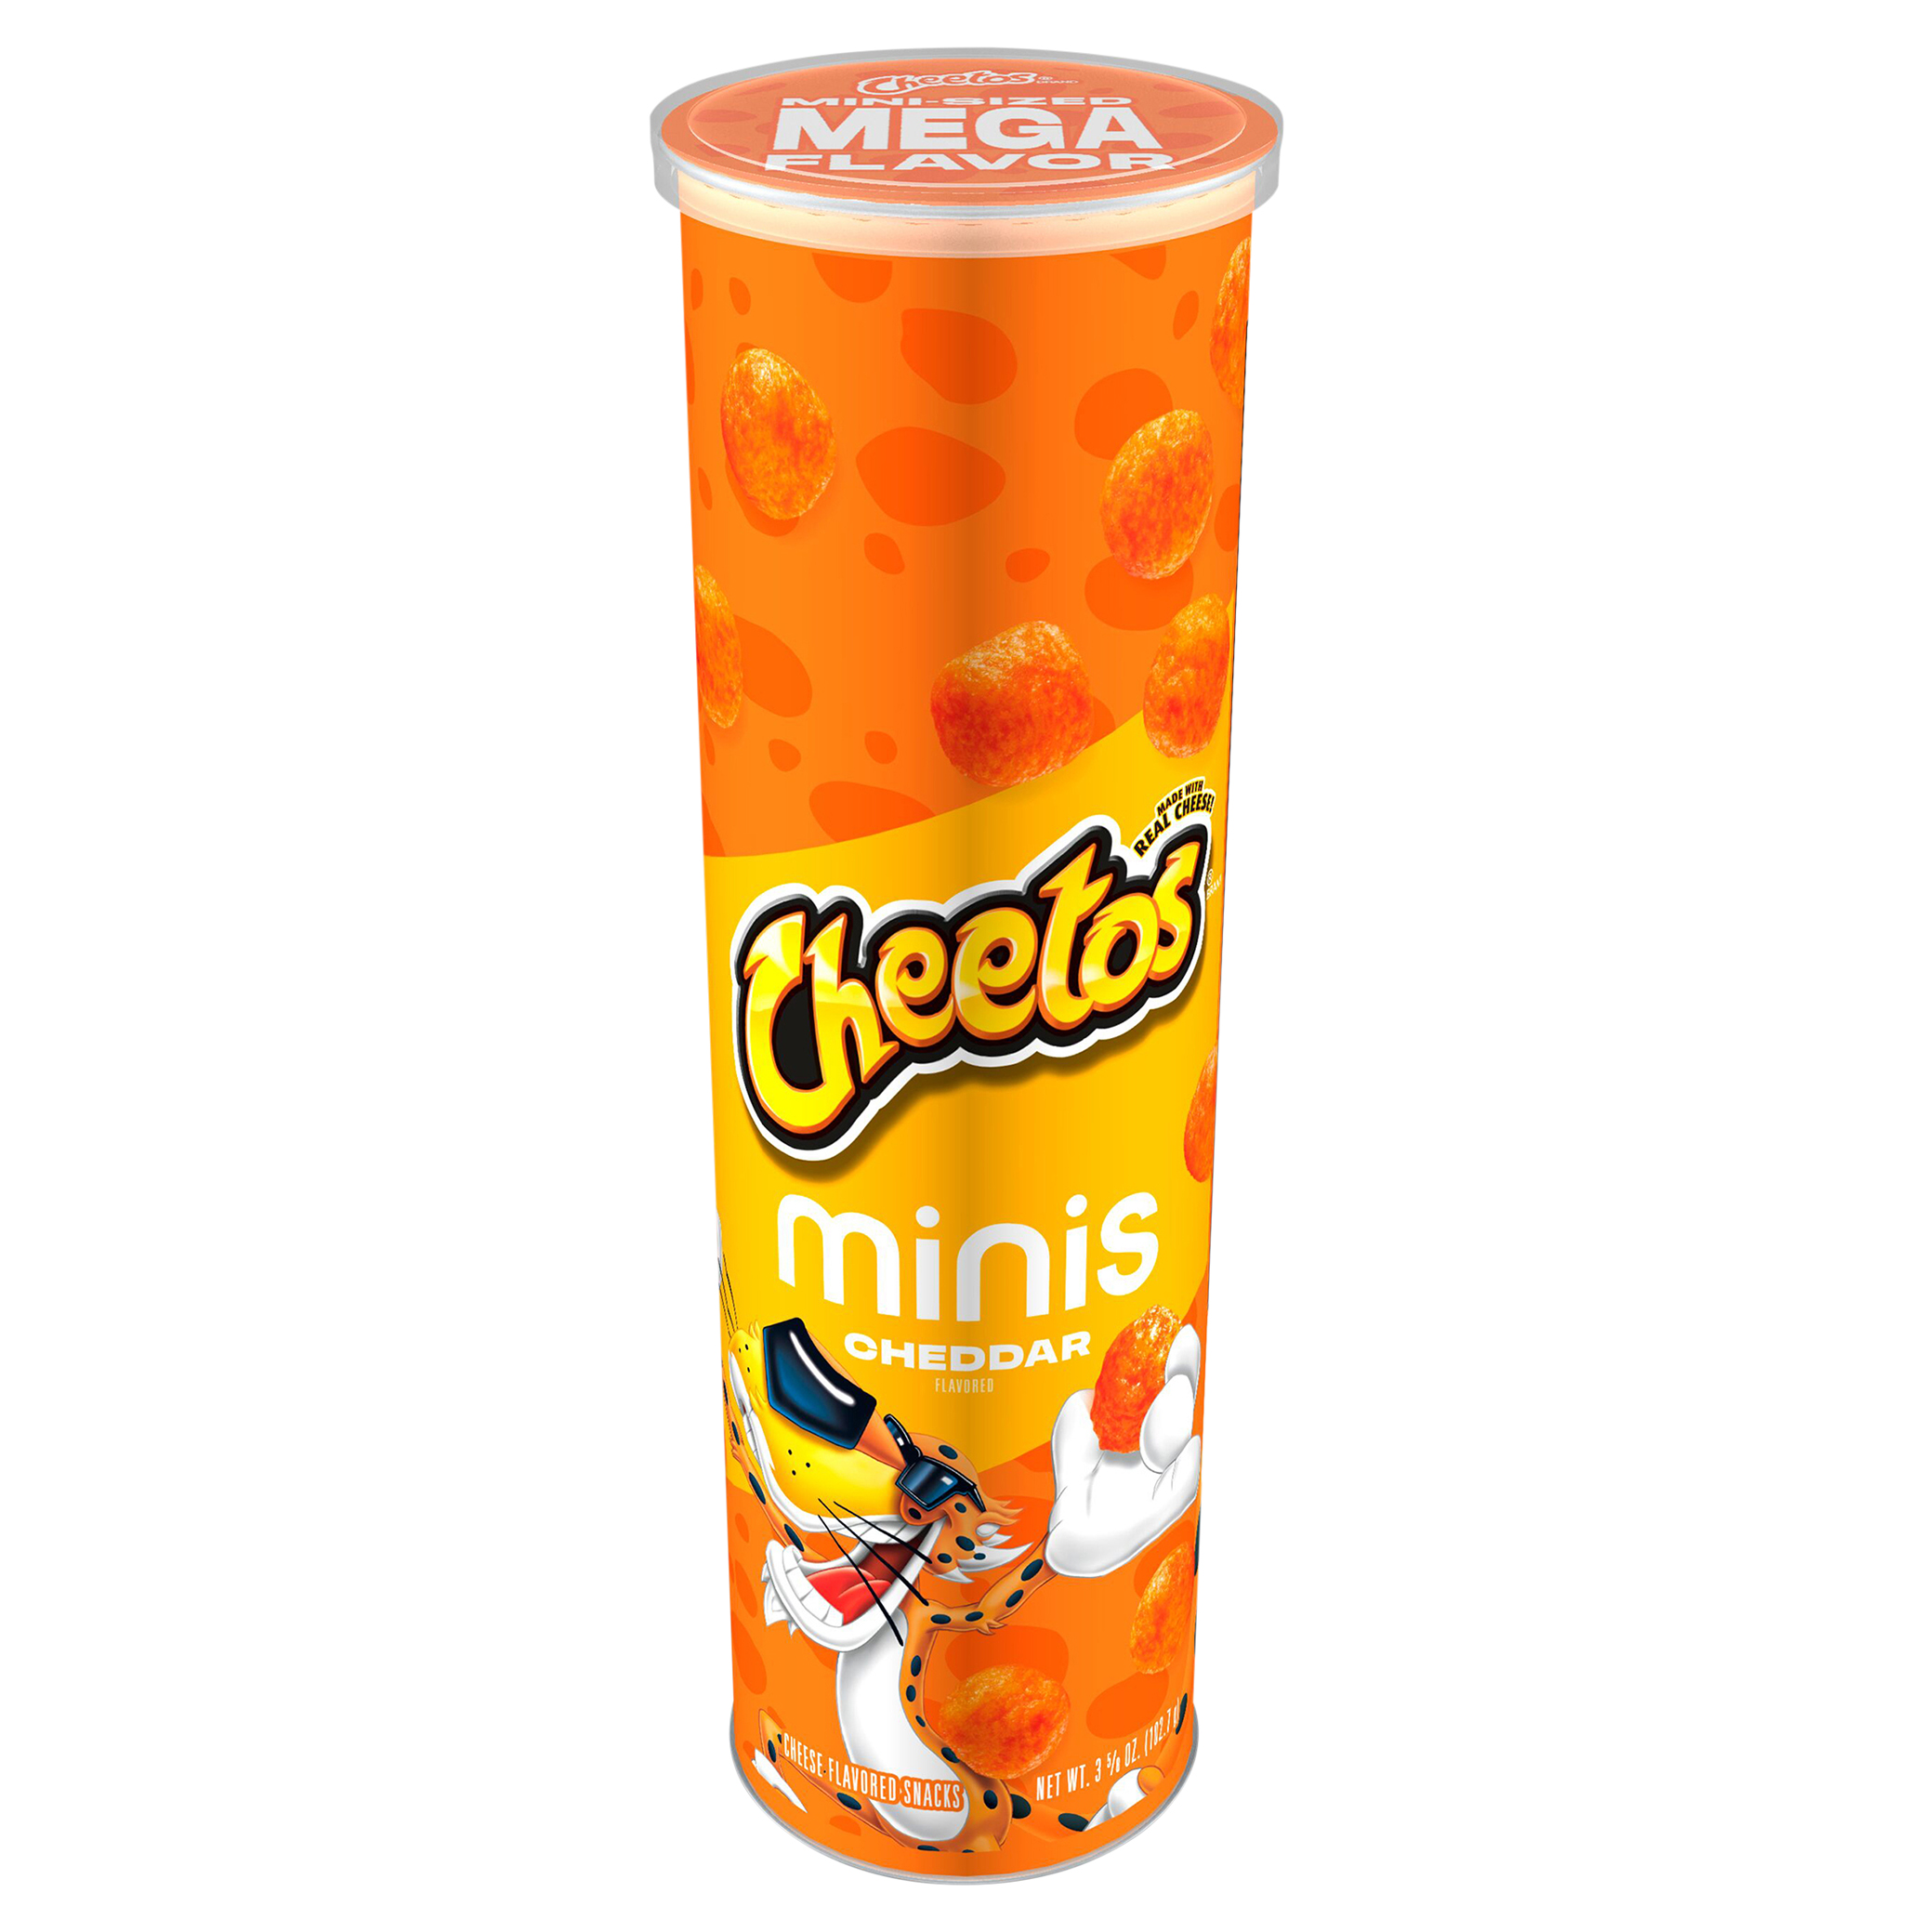 Cheese Flavored Snacks